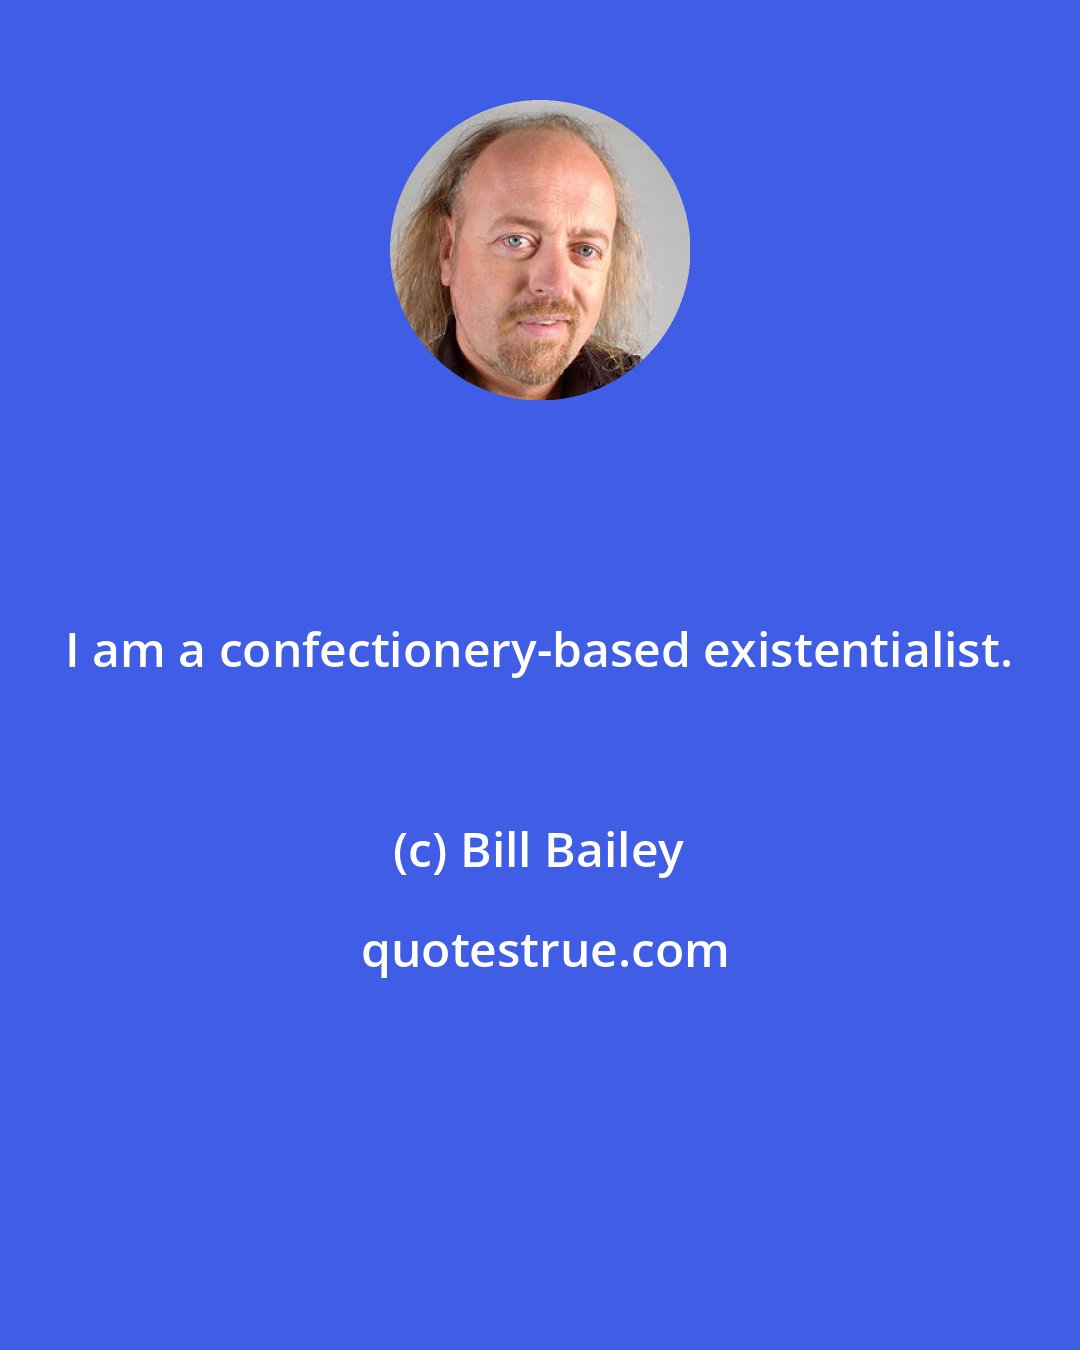 Bill Bailey: I am a confectionery-based existentialist.